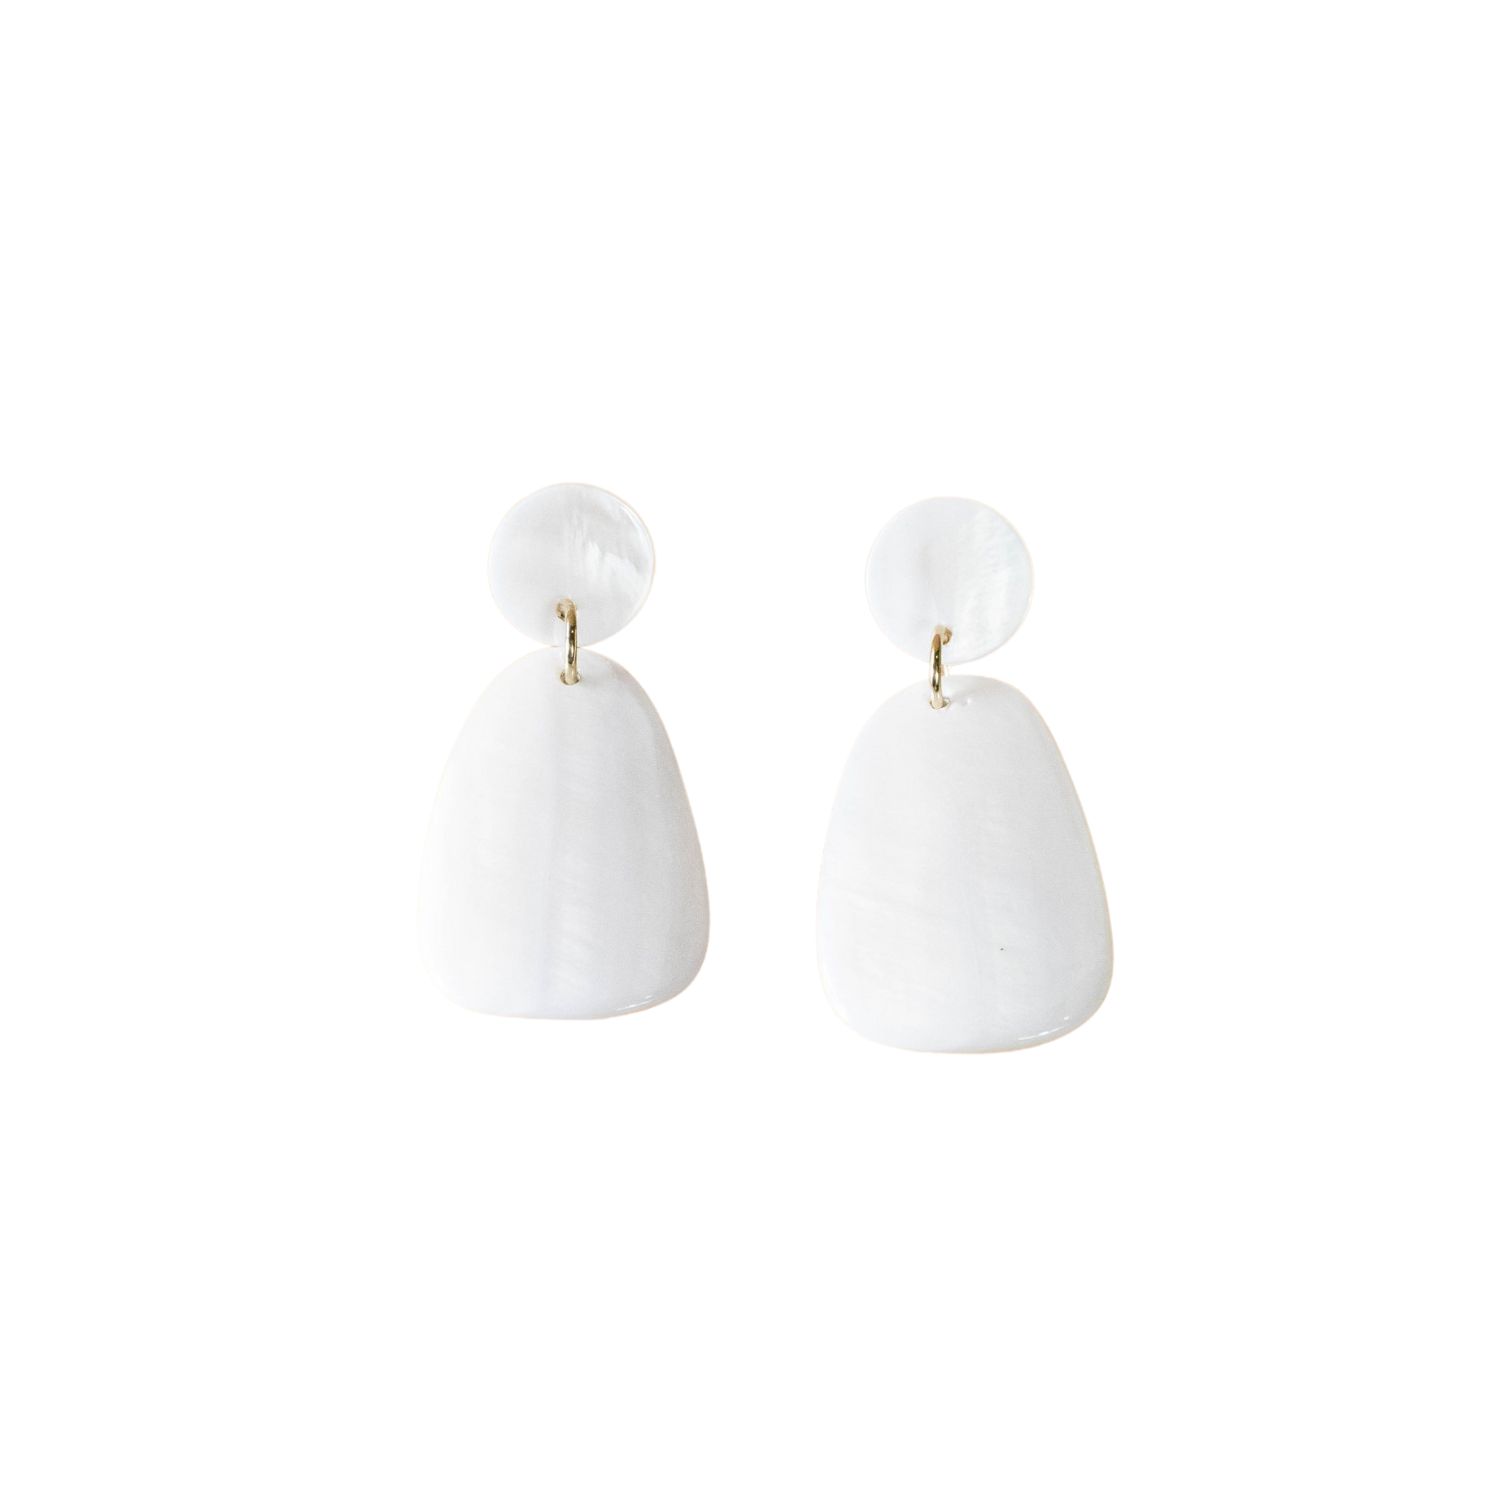 Likha Women's Classic Pearl White Trapezoid Mother-of-pearl Earrings